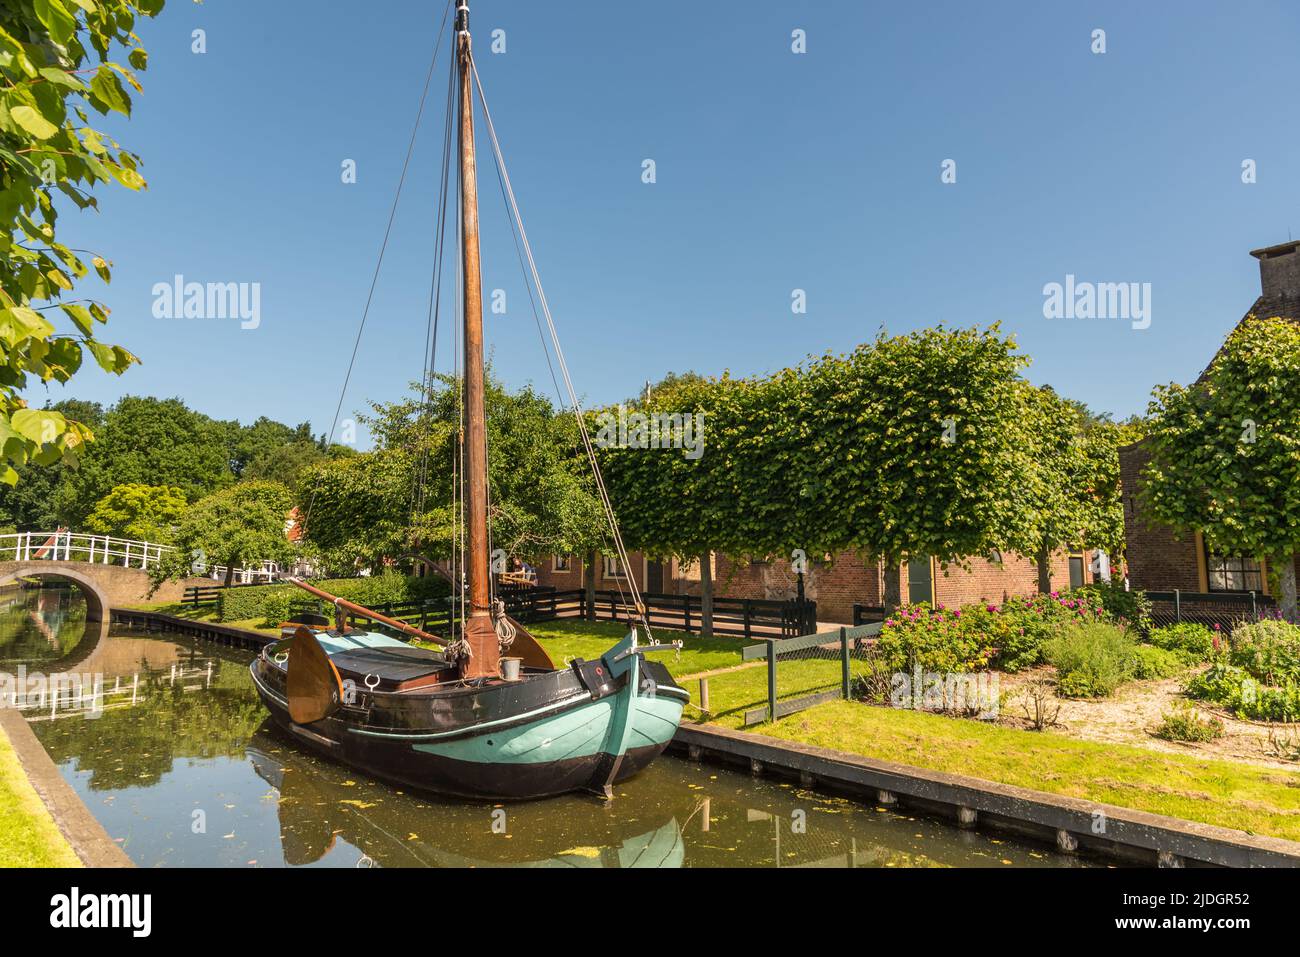 Enkhuizen, the Netherlands. June . The Zuiderzeemuseum, an open air museum at the shore of the IJsselmeer with traditional Dutch fishermen cottages an Stock Photo